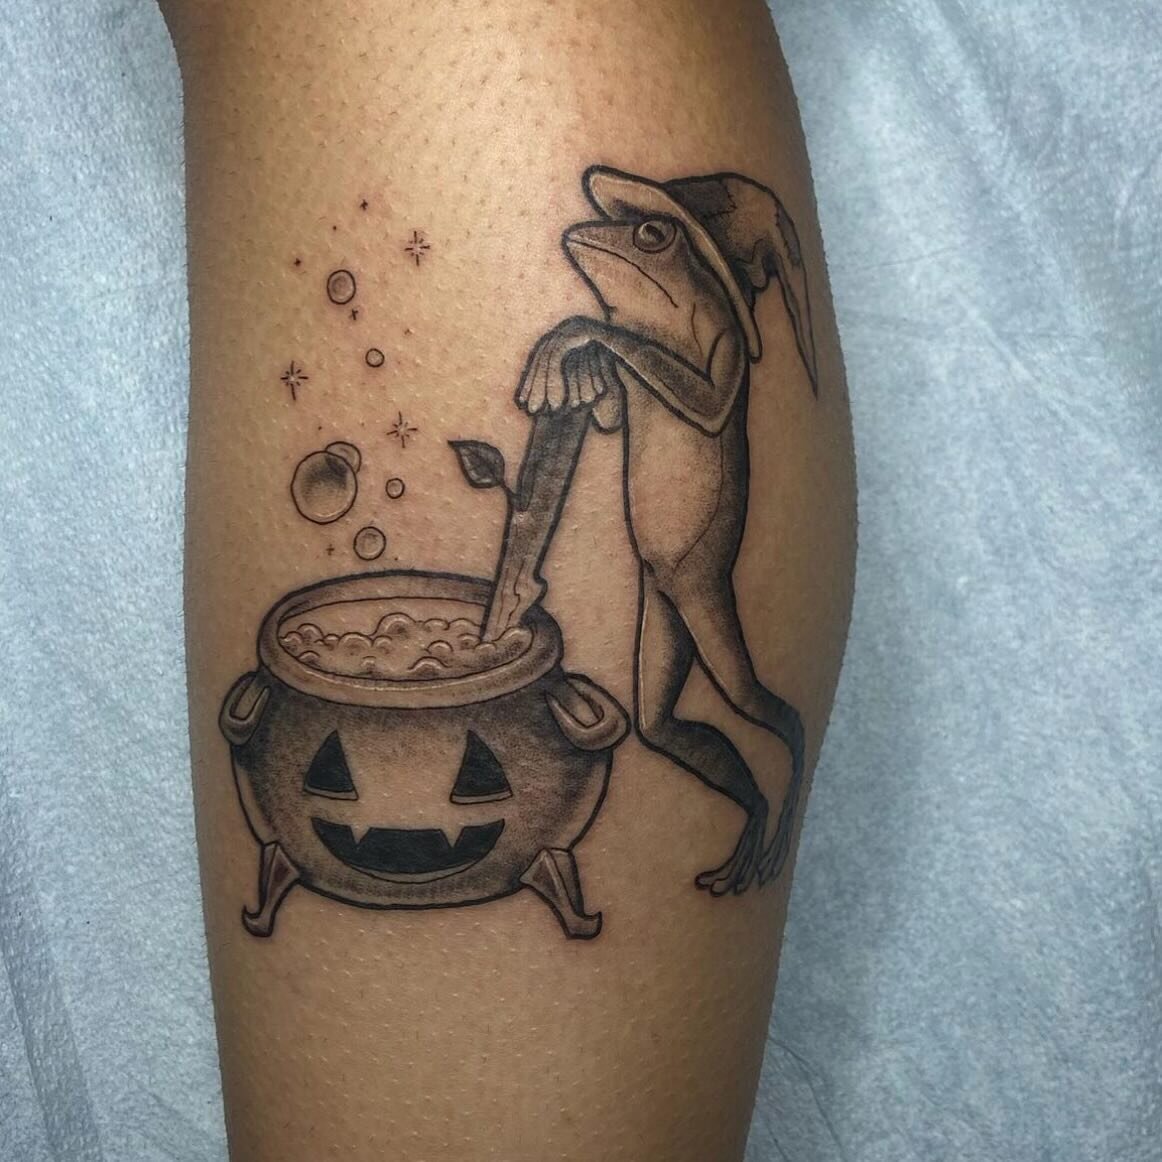 Can&rsquo;t text, I&rsquo;m too busy stirring my potion 🫧 @averyblacktattoo 
.
.
.
#frog #frogtattoo #spookyseason #cauldron #jackolantern #witchytattoos #spooky #spookytattoo #blackandgreytattoo #cttattoo #cttattooartist